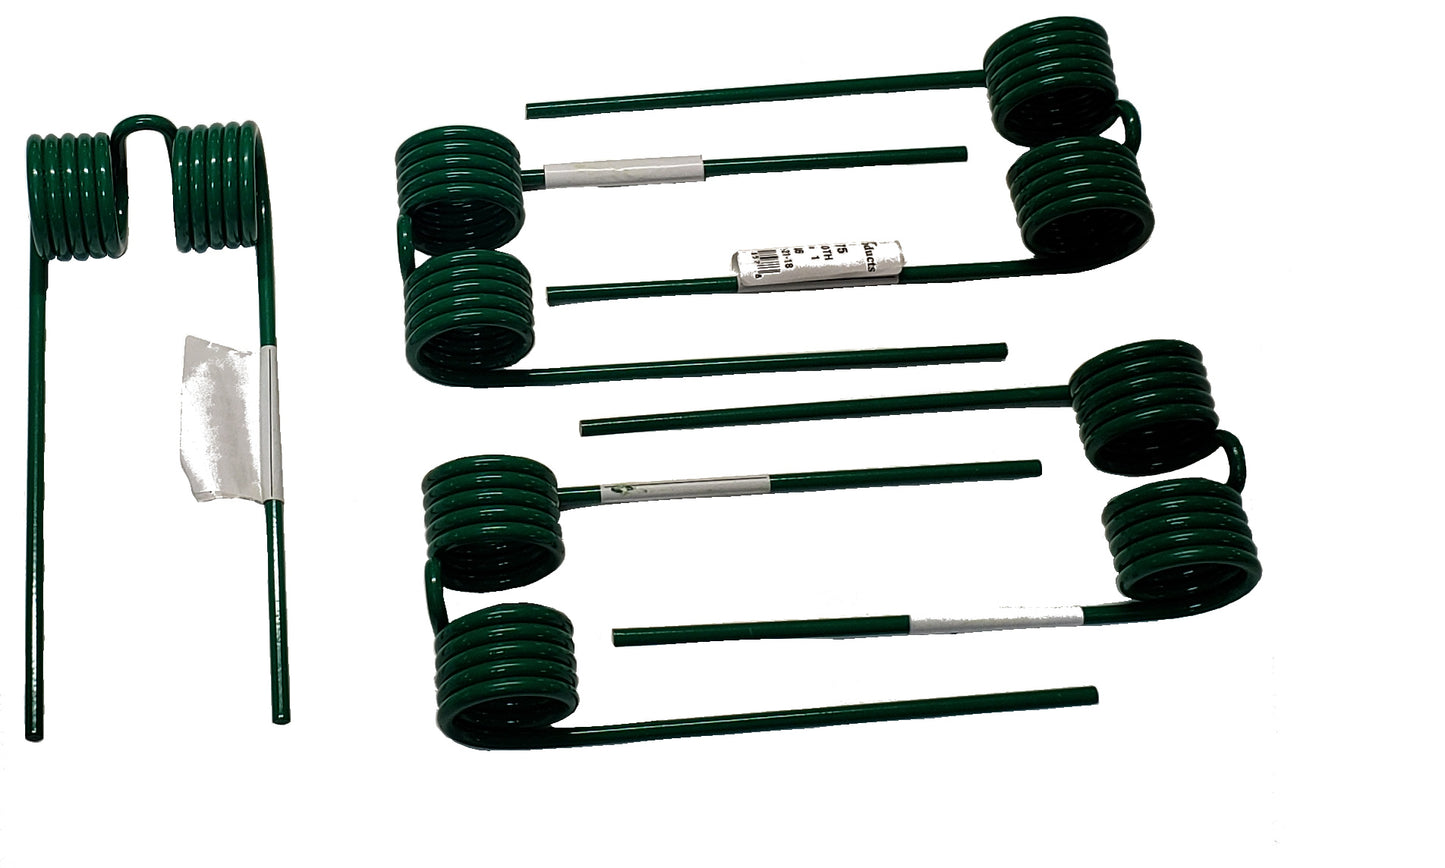 A&I Products Baler Tooth SET OF 5 - A-E79475